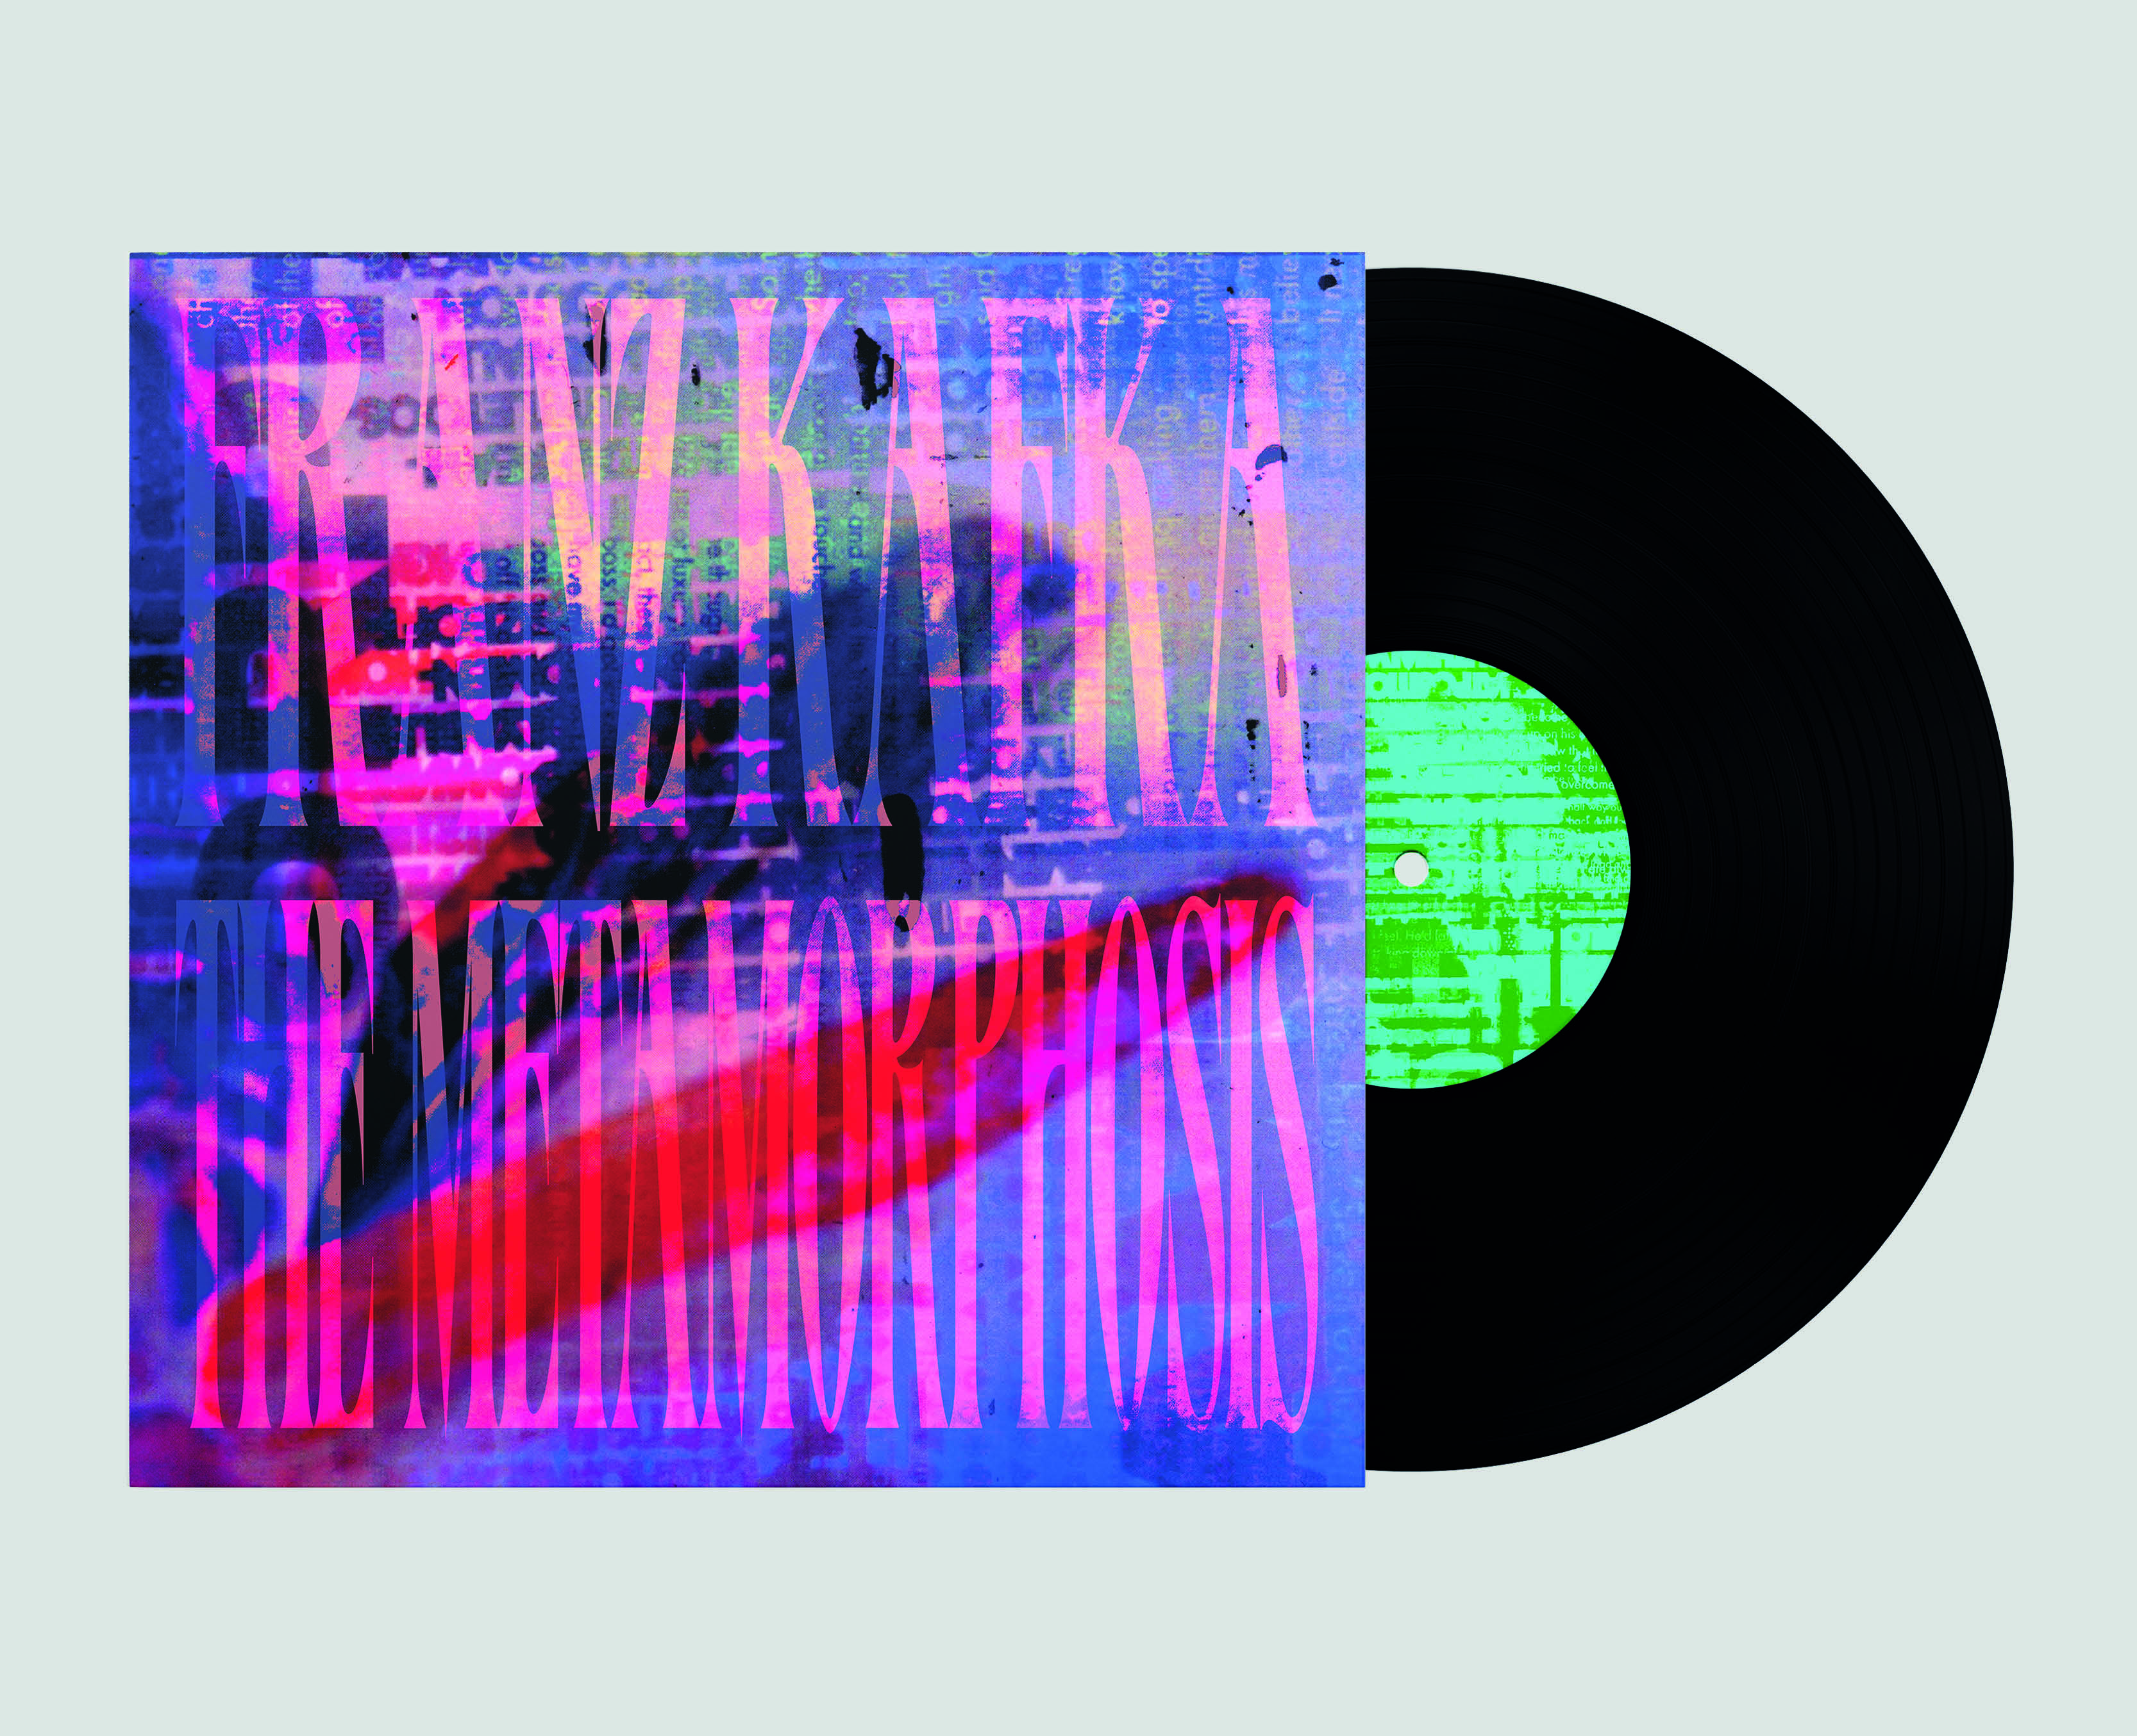 Record sleeve design by Imogen Allen displaying abstract, typographic imagery.